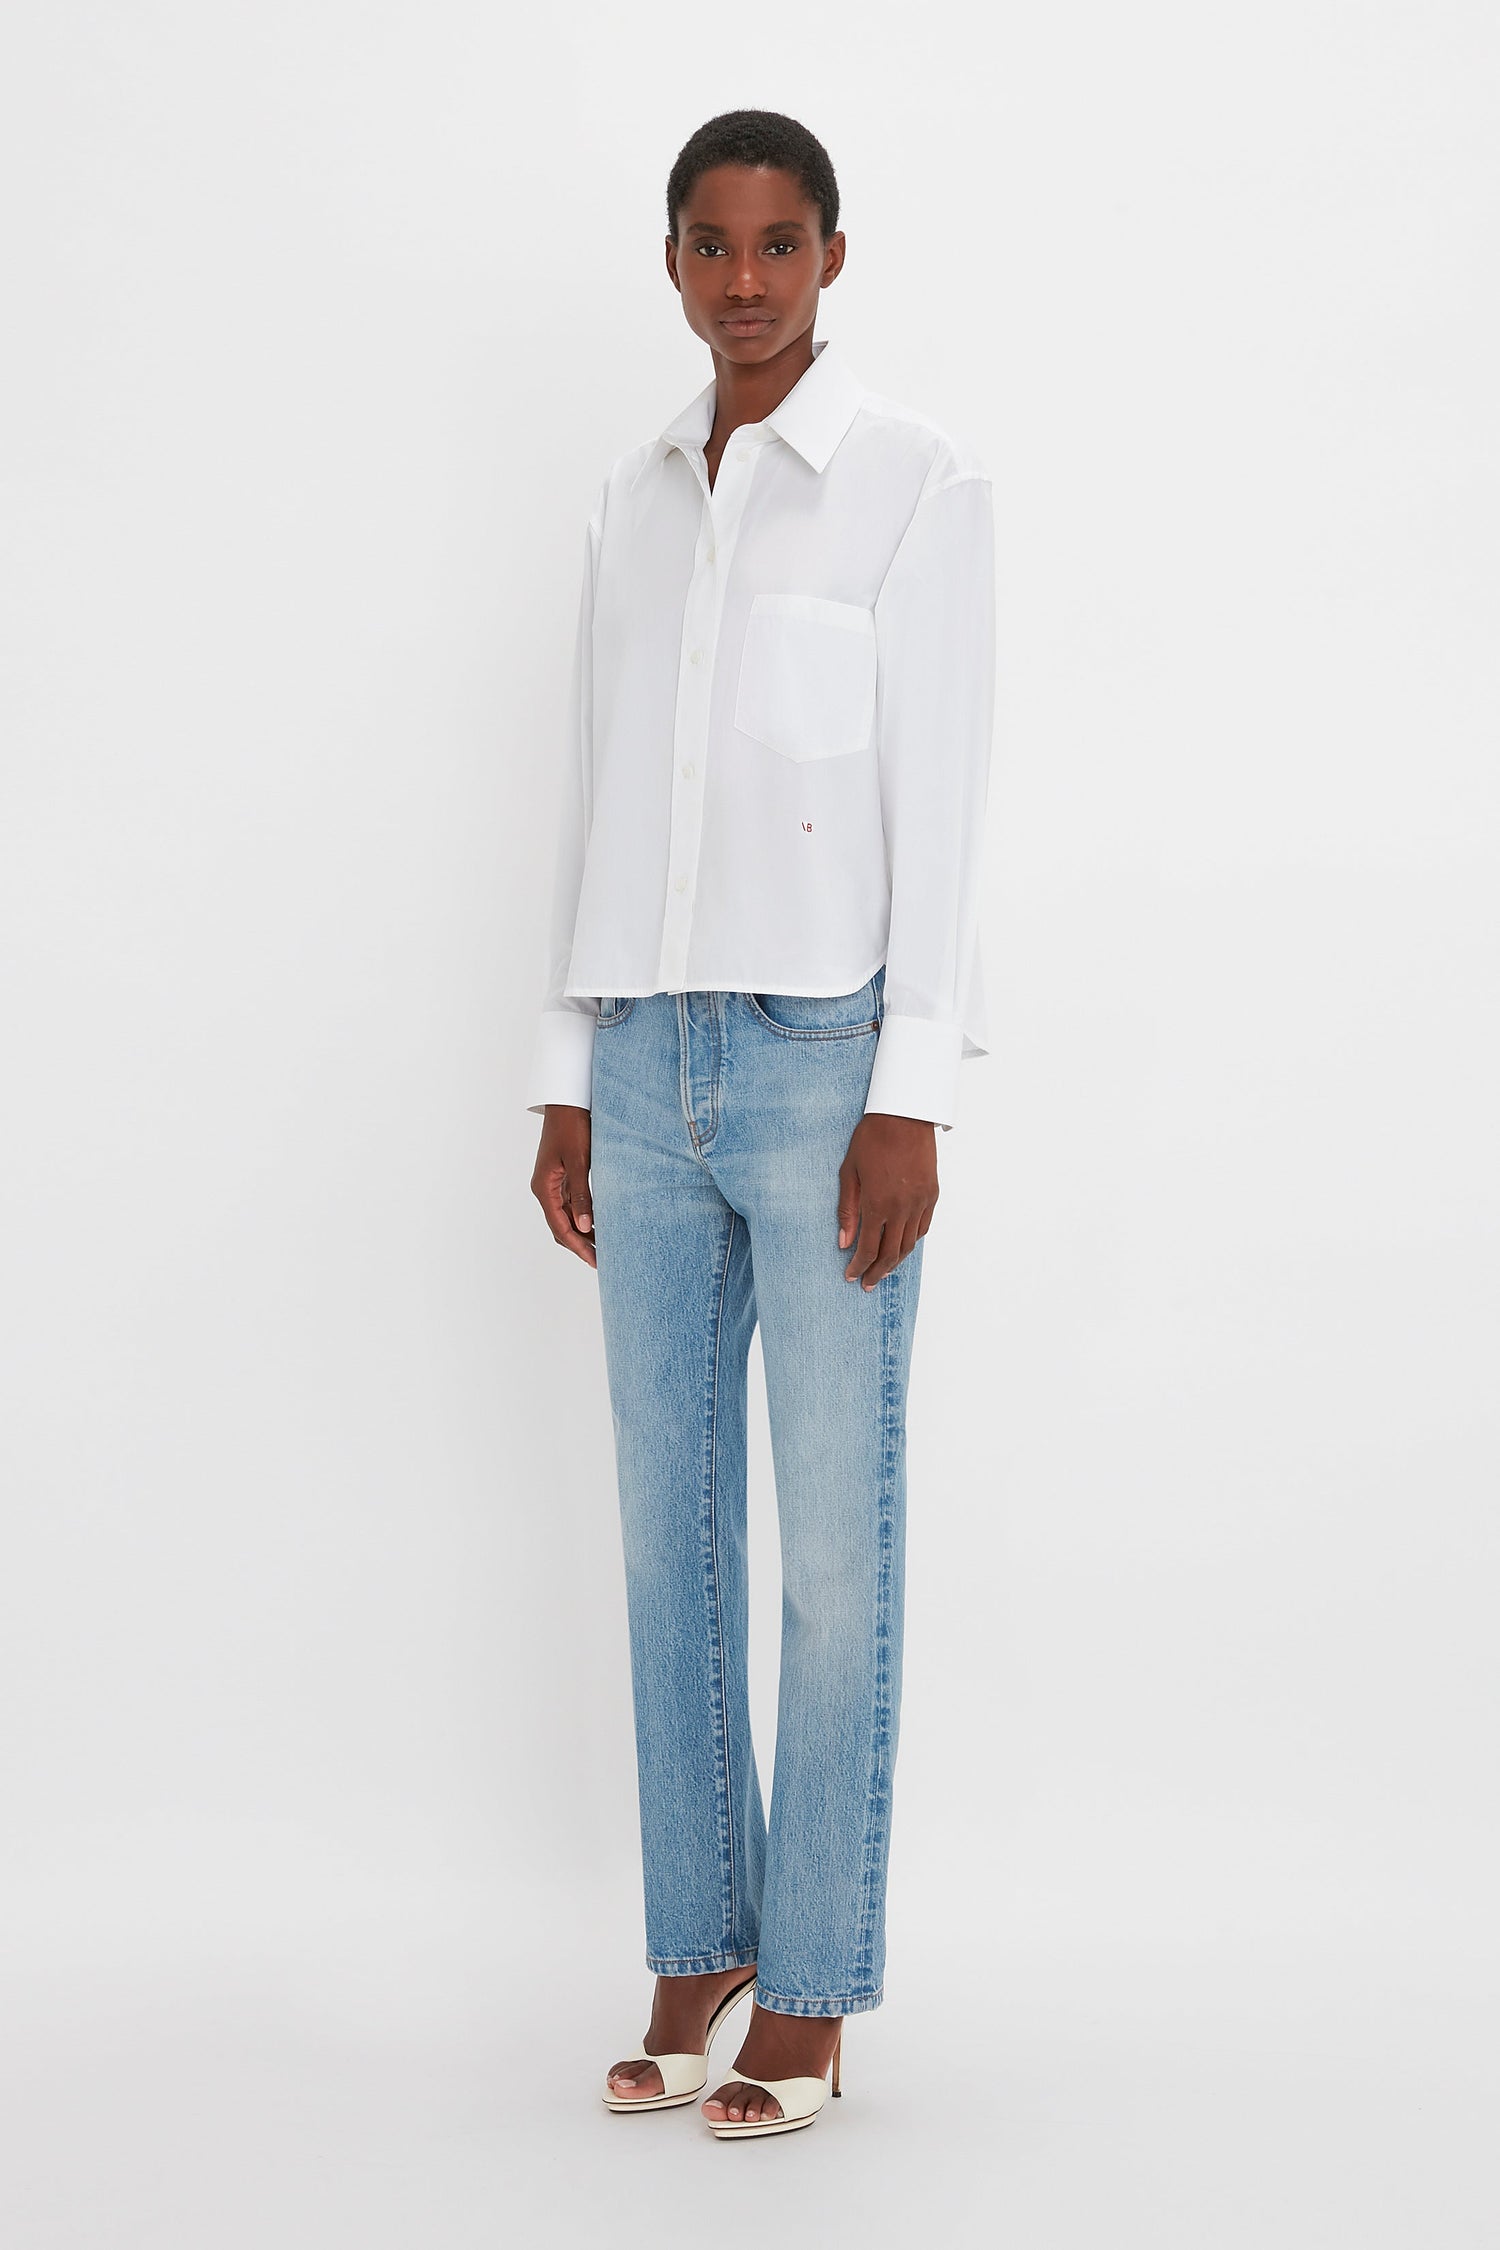 A woman in a classic white Cropped Long Sleeve Shirt In White by Victoria Beckham monogram and blue jeans stands facing the camera against a plain white background.